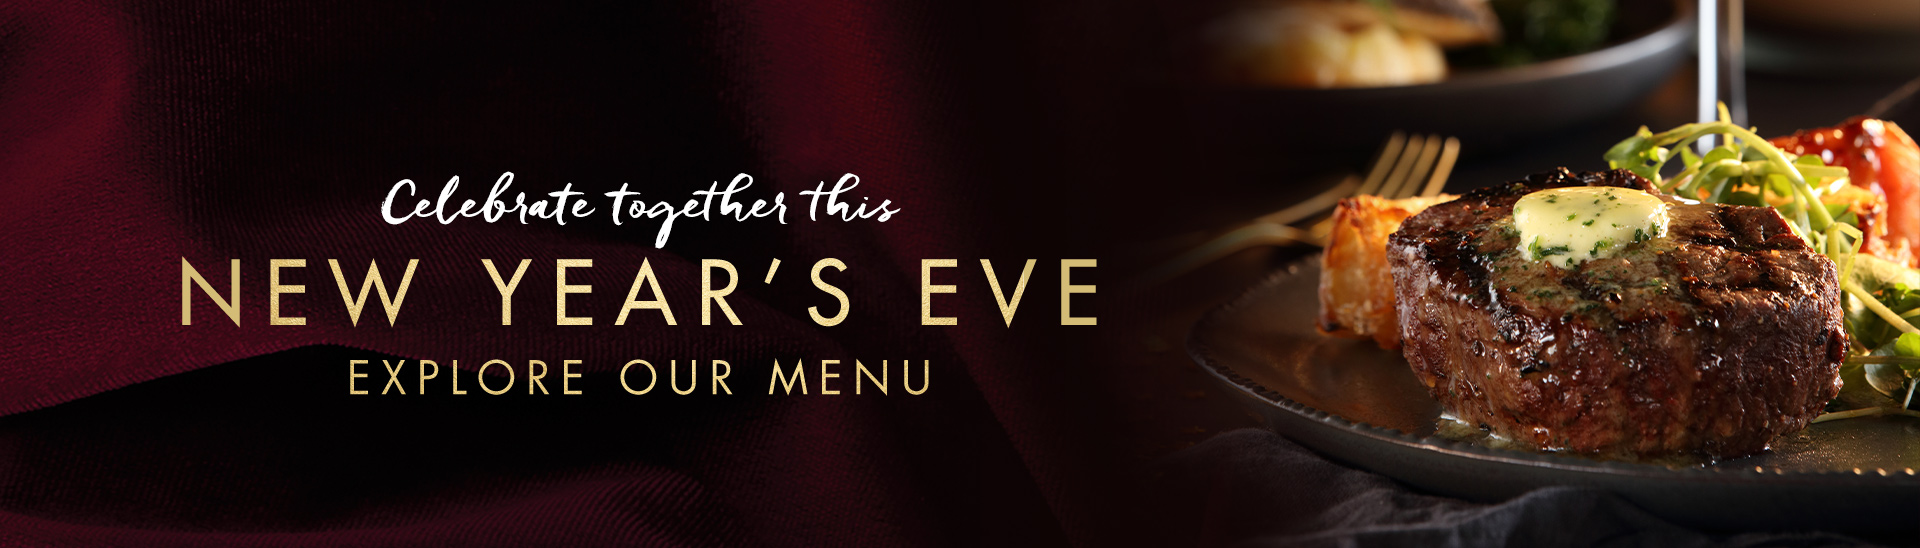 New Year’s eve menu at Miller & Carter Rayleigh 